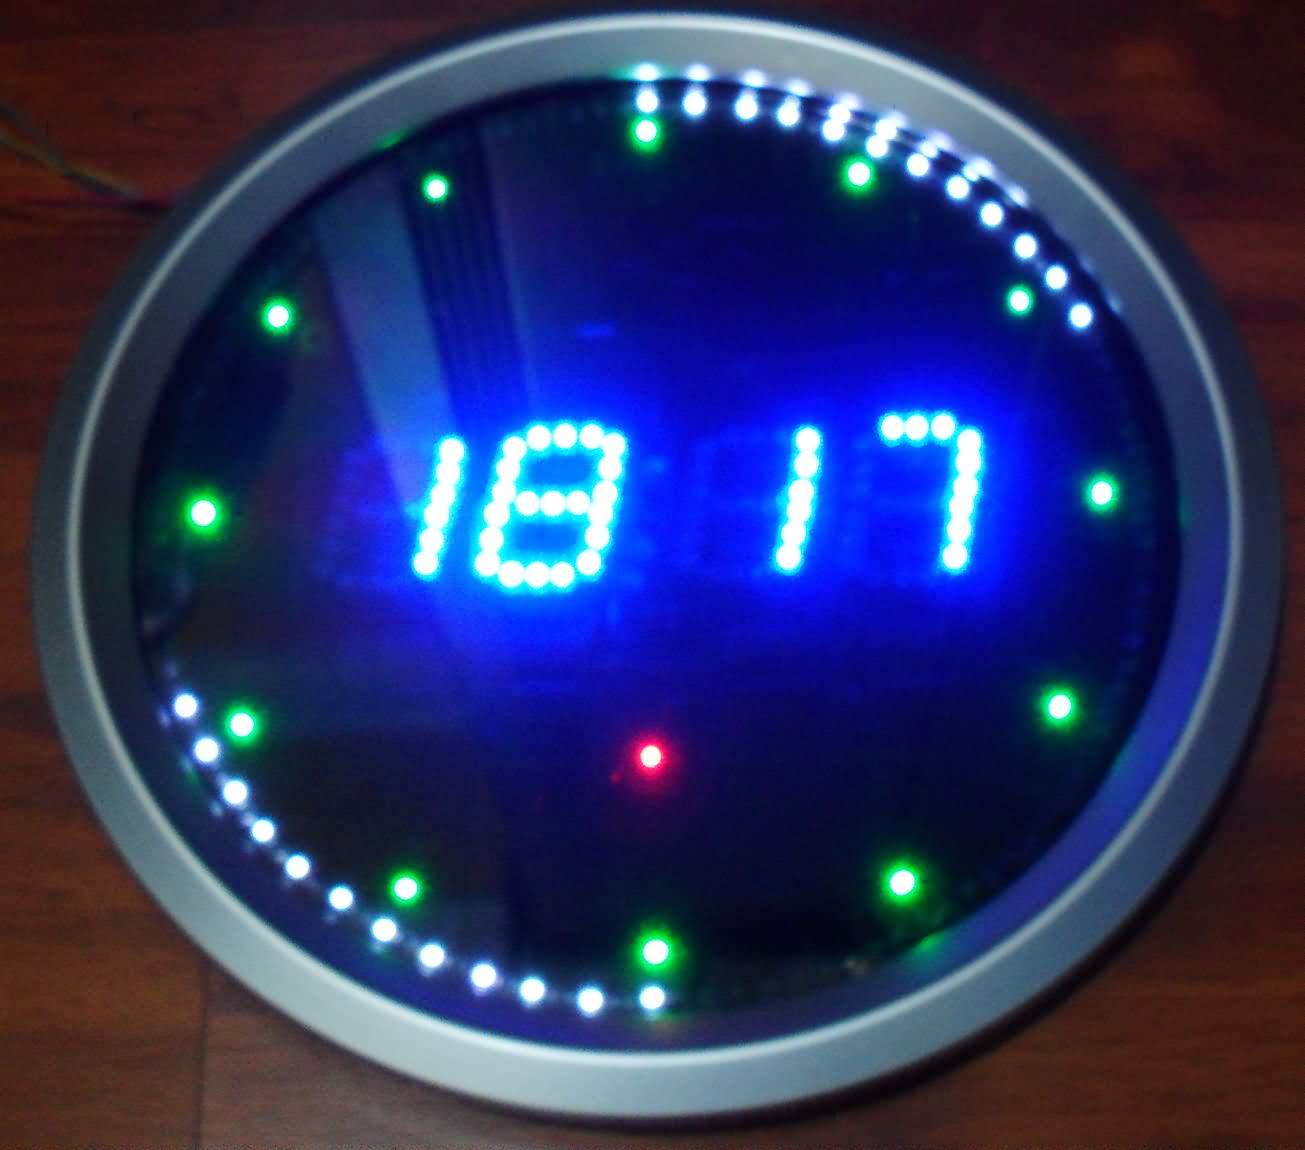 PIC16F648 Led Animated Clock Circuit Picbasic – Electronics Projects  Circuits